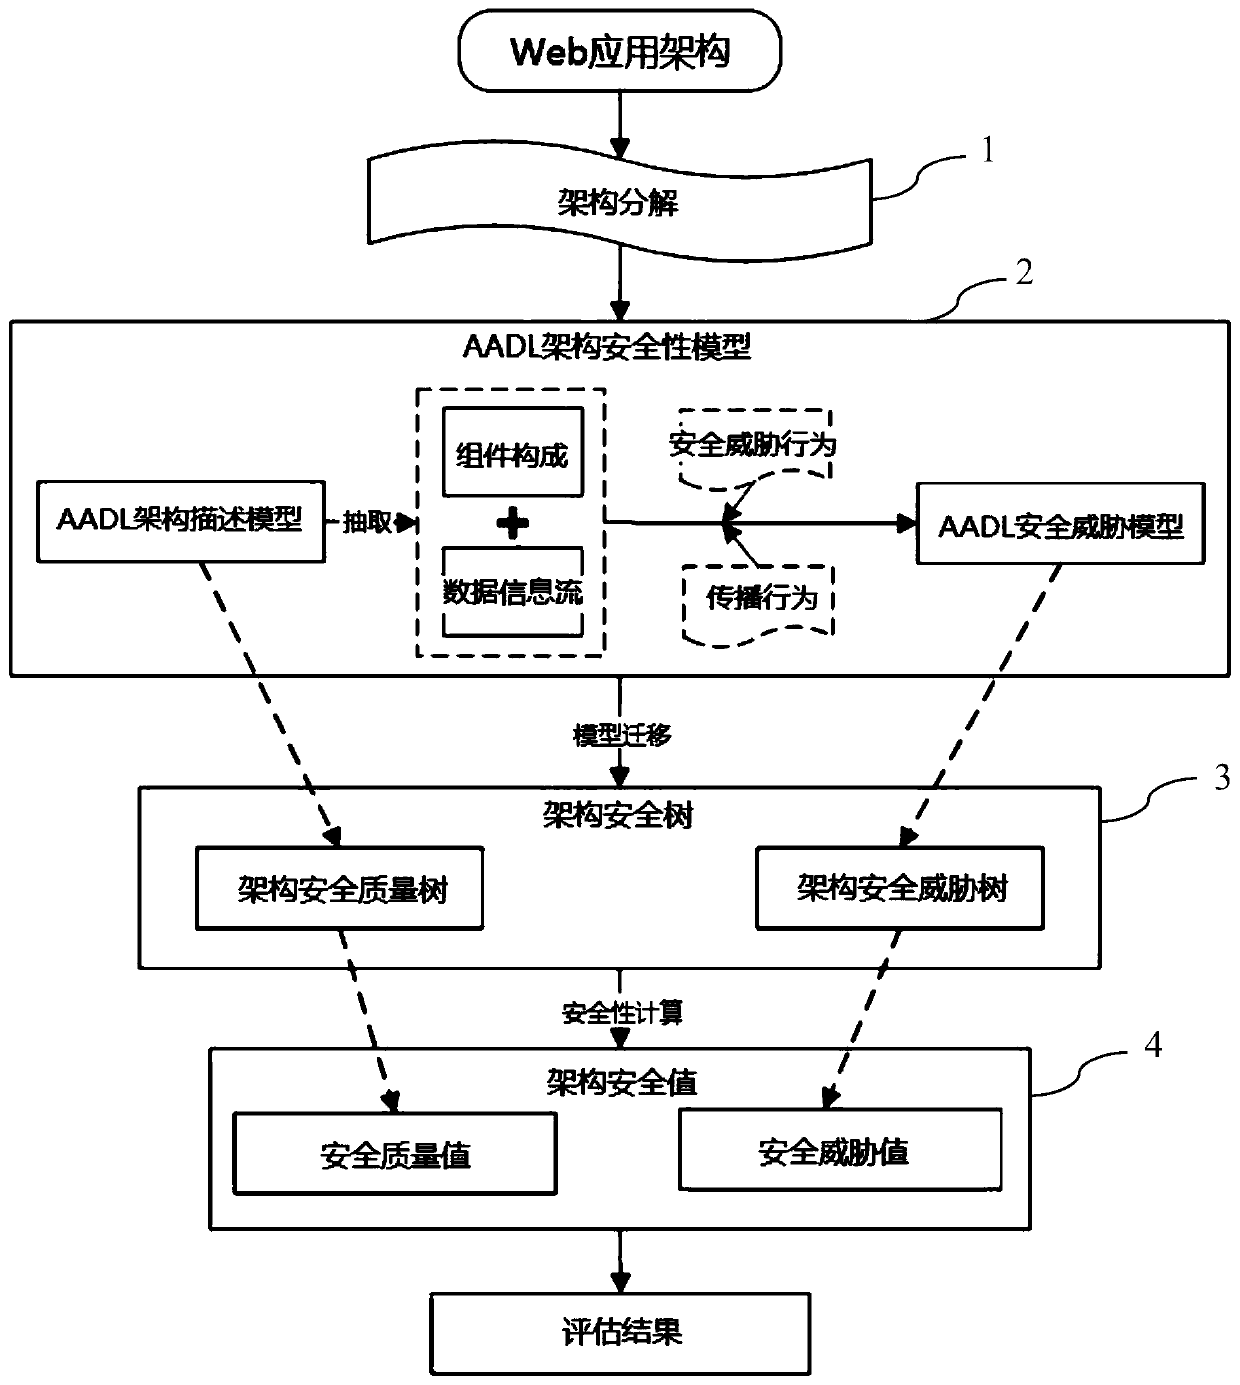 AADL-Based Evaluation Method of Web Application Architecture Security